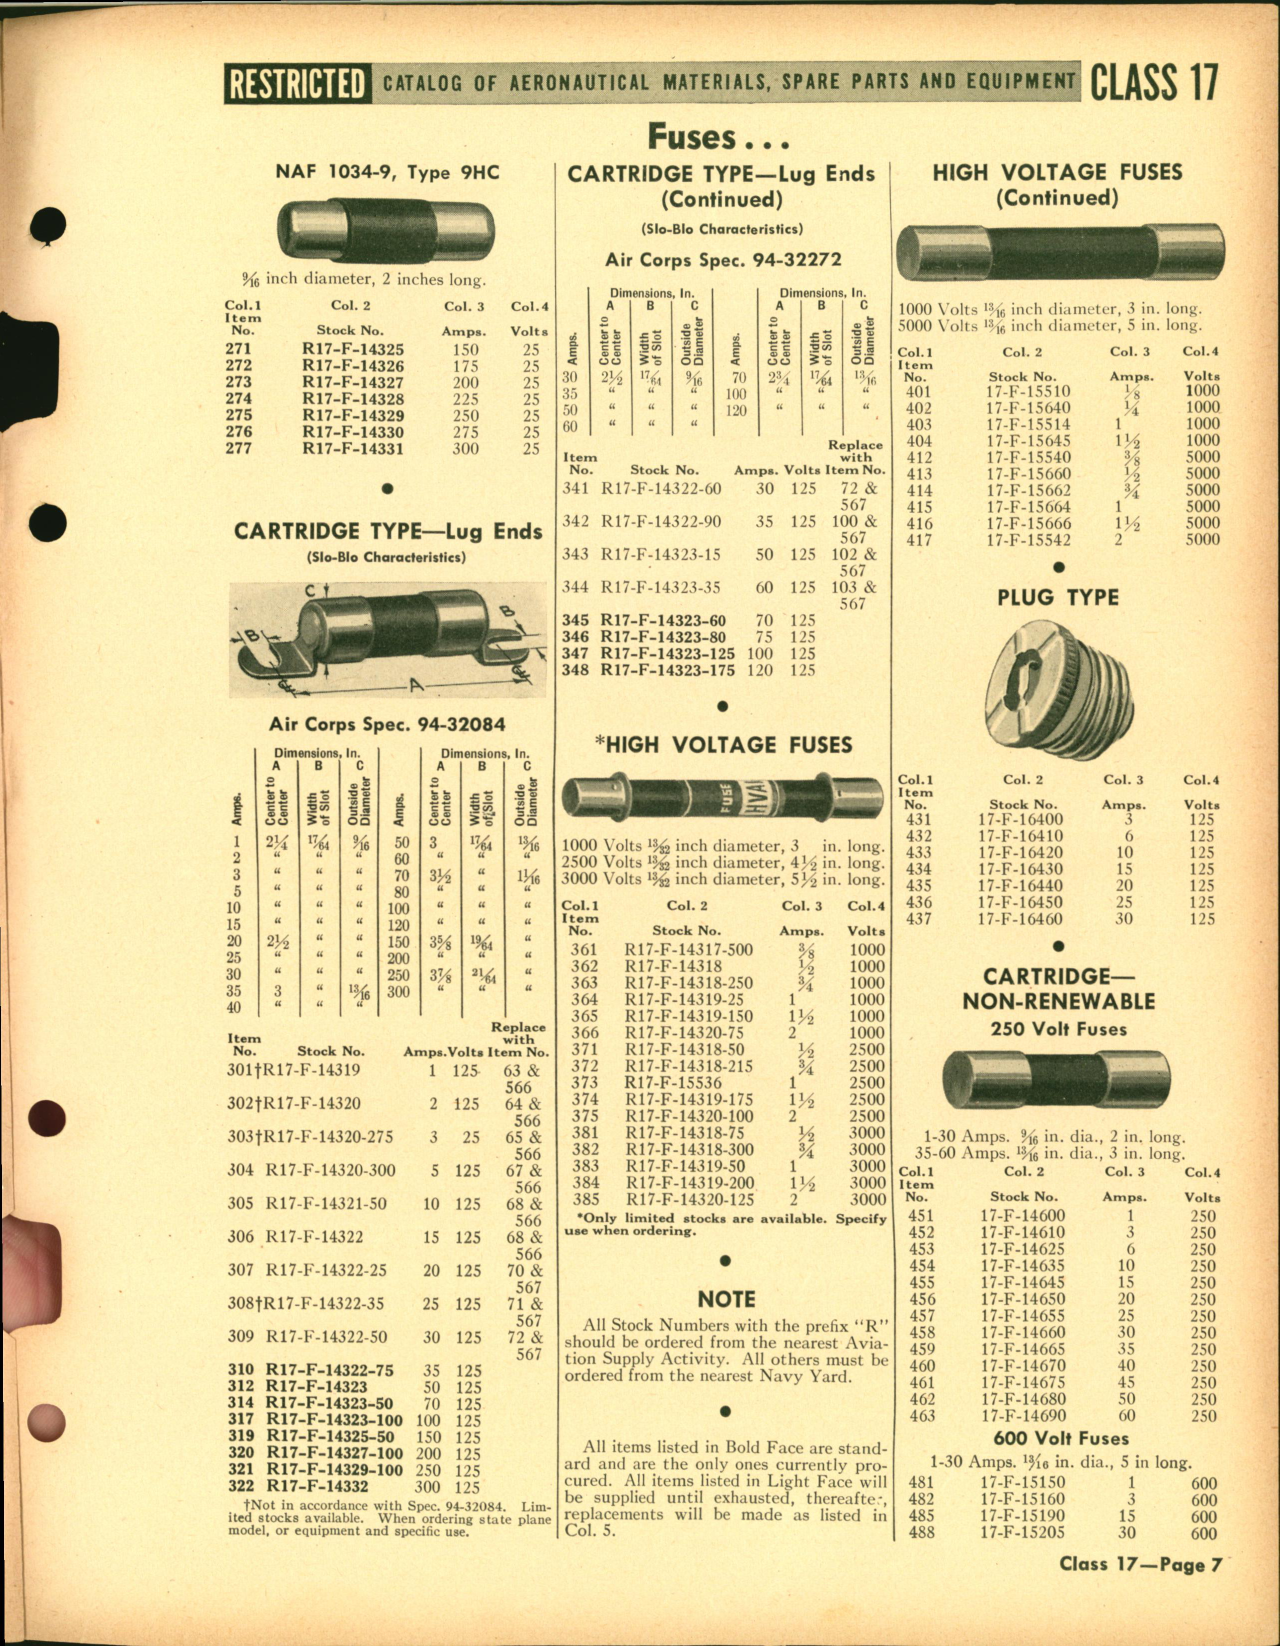 Sample page 7 from AirCorps Library document: Fuses